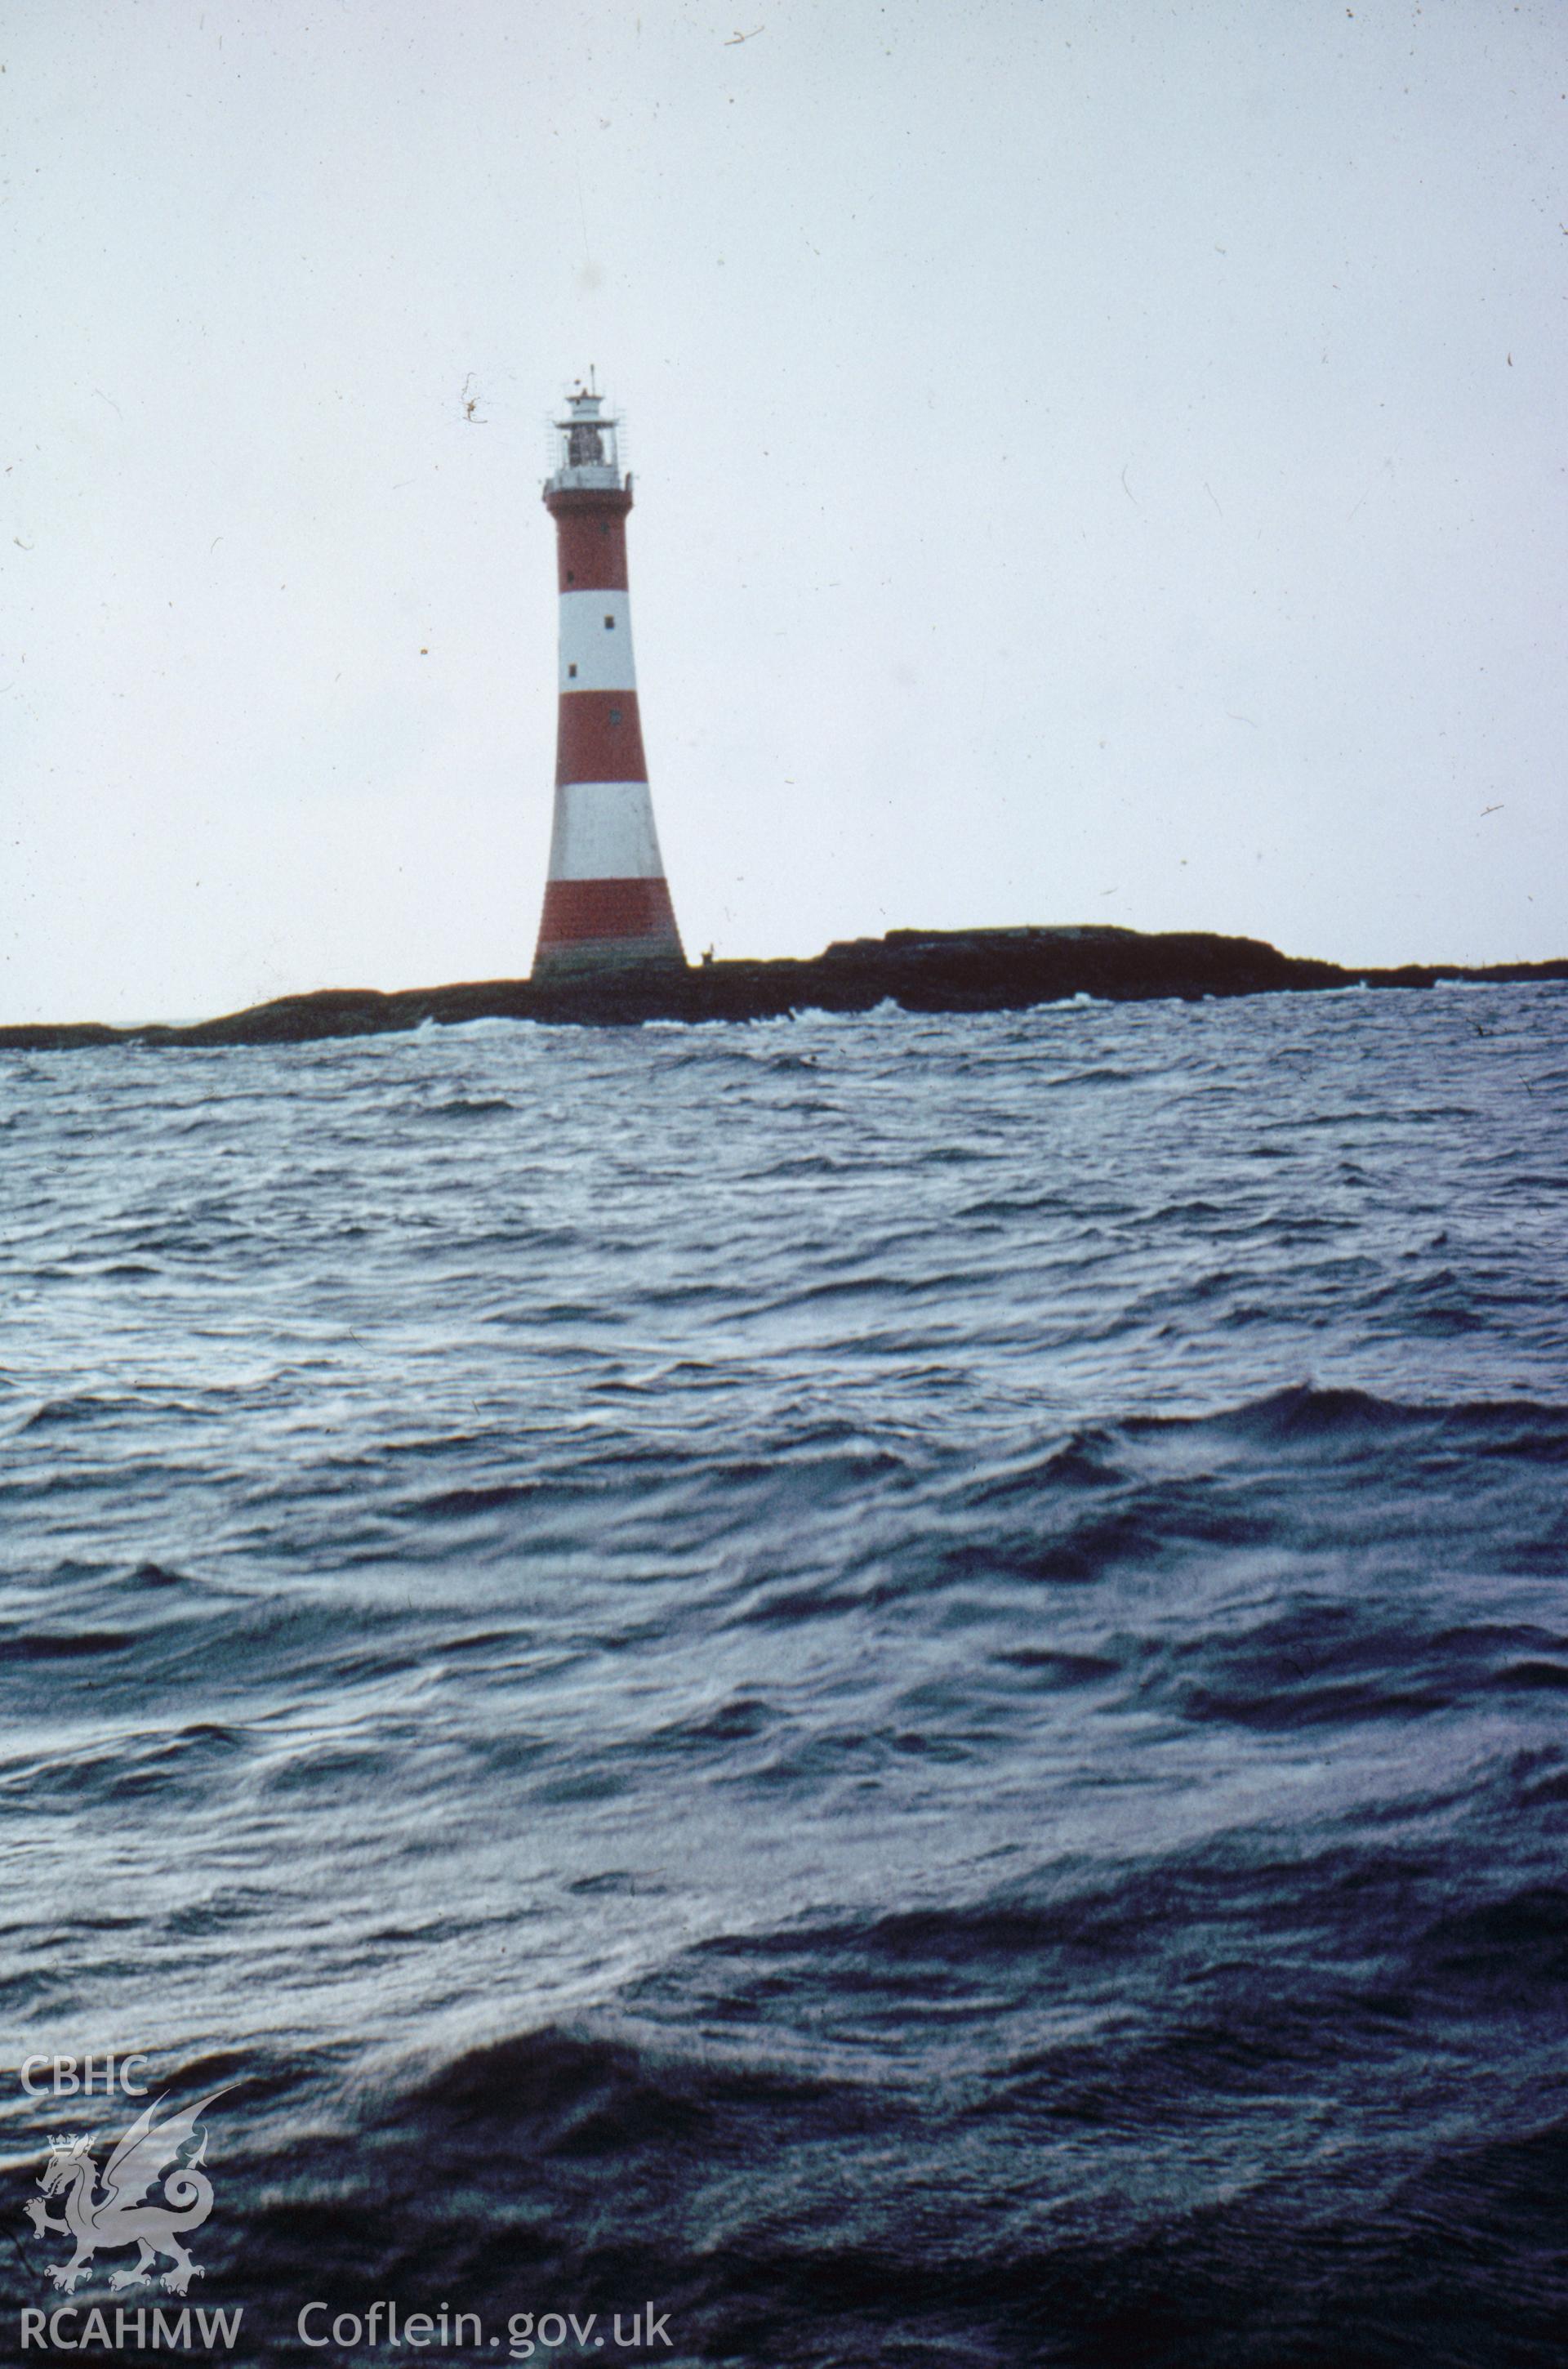 Colour slide showing view of the Smalls Lighthouse from the sea.